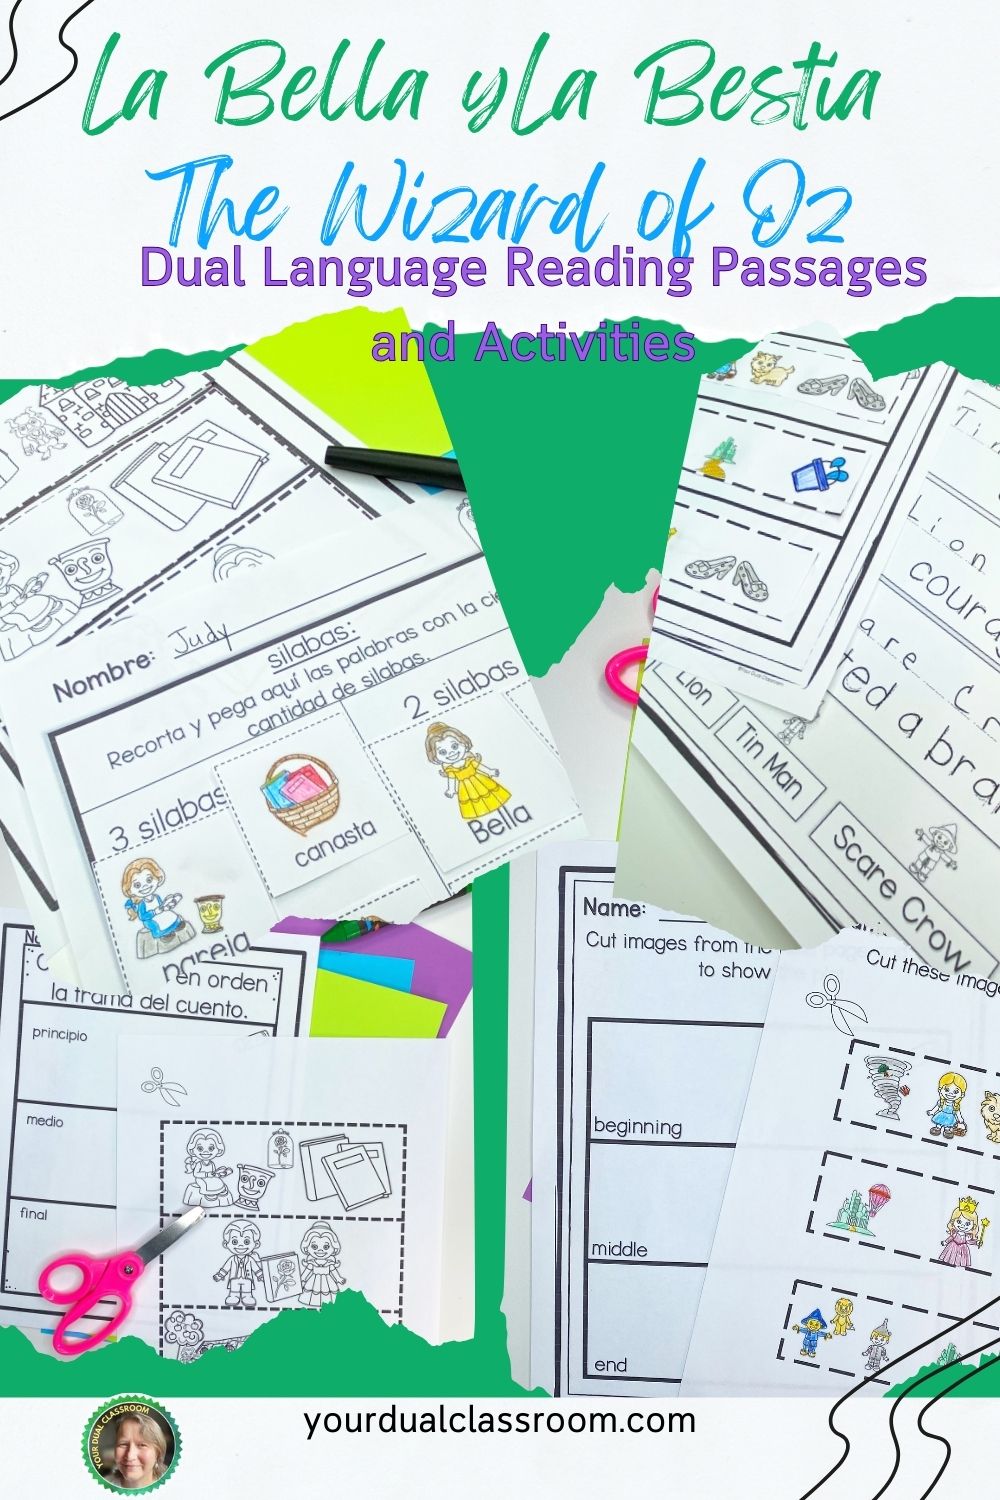 Image of activities for Dual Language reading comprehension passages.